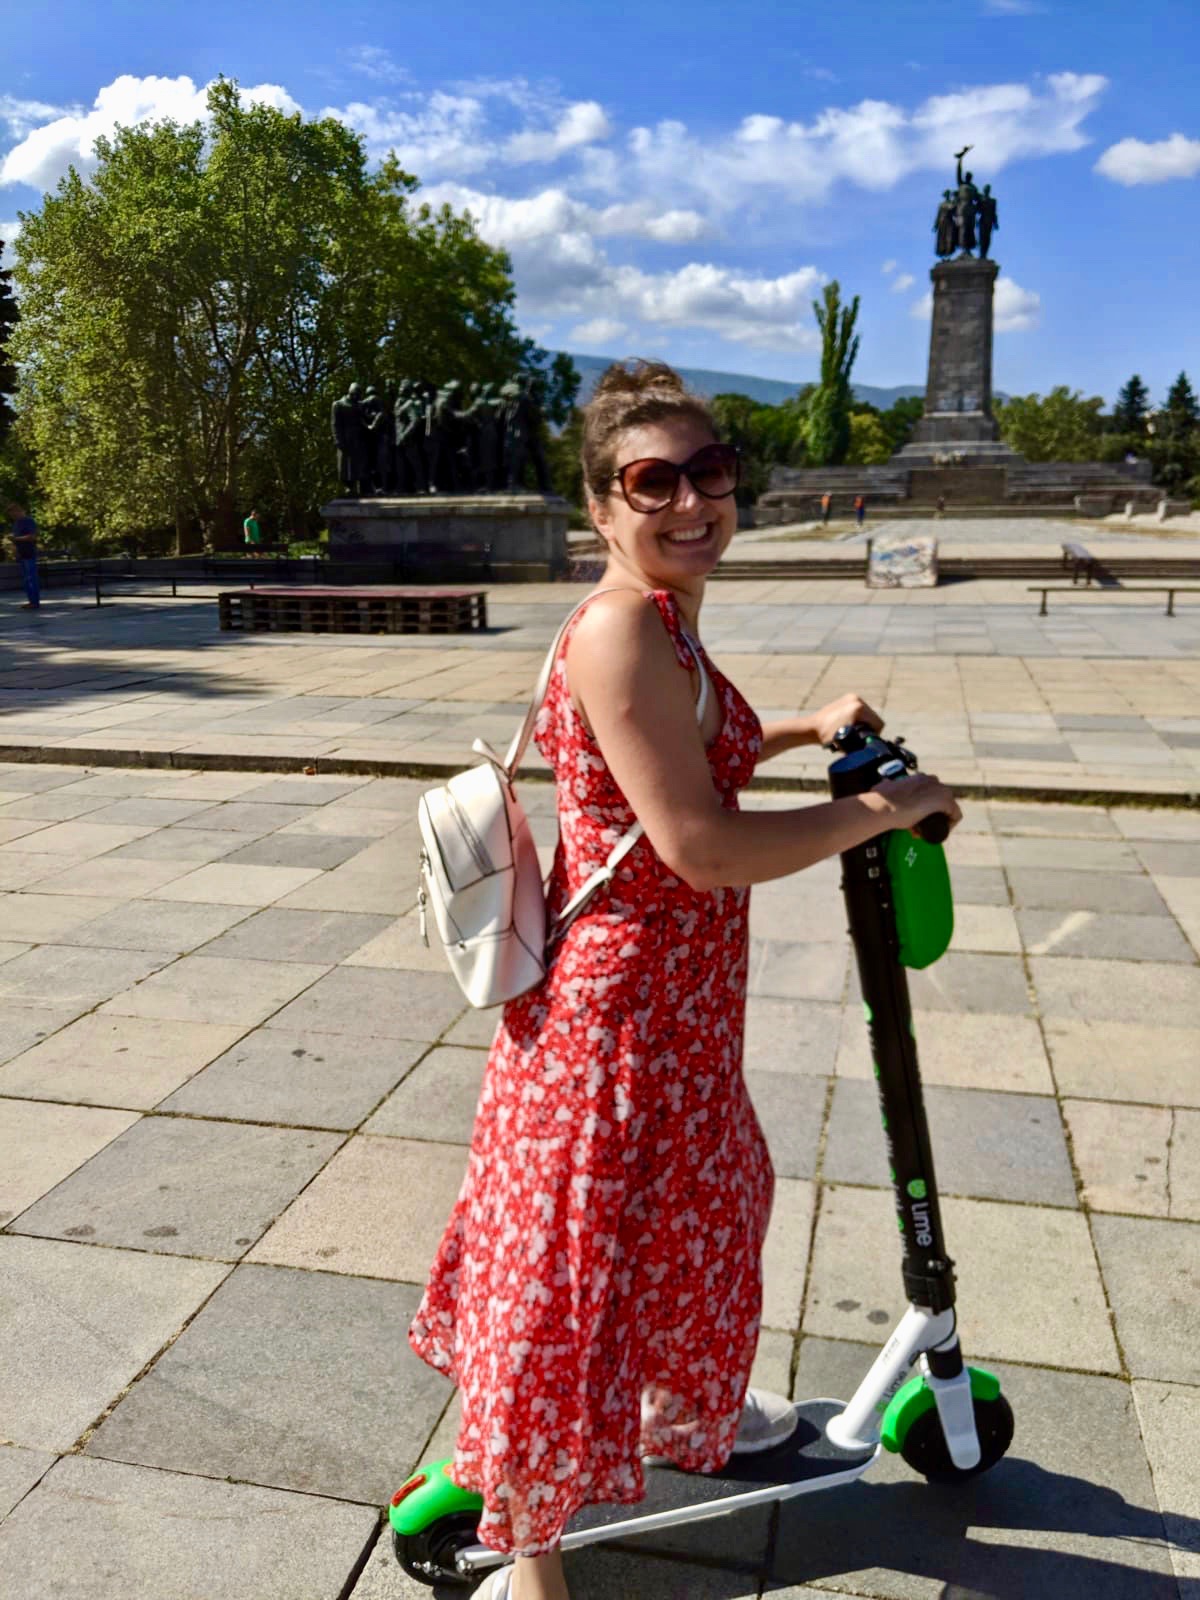 Nell in red floral dress on an electric scooter, in a park in Sofia enjoying her city break. There is a statue behind her and the sky is blue, she has one leg on the scooter and is turned to smile at the camera